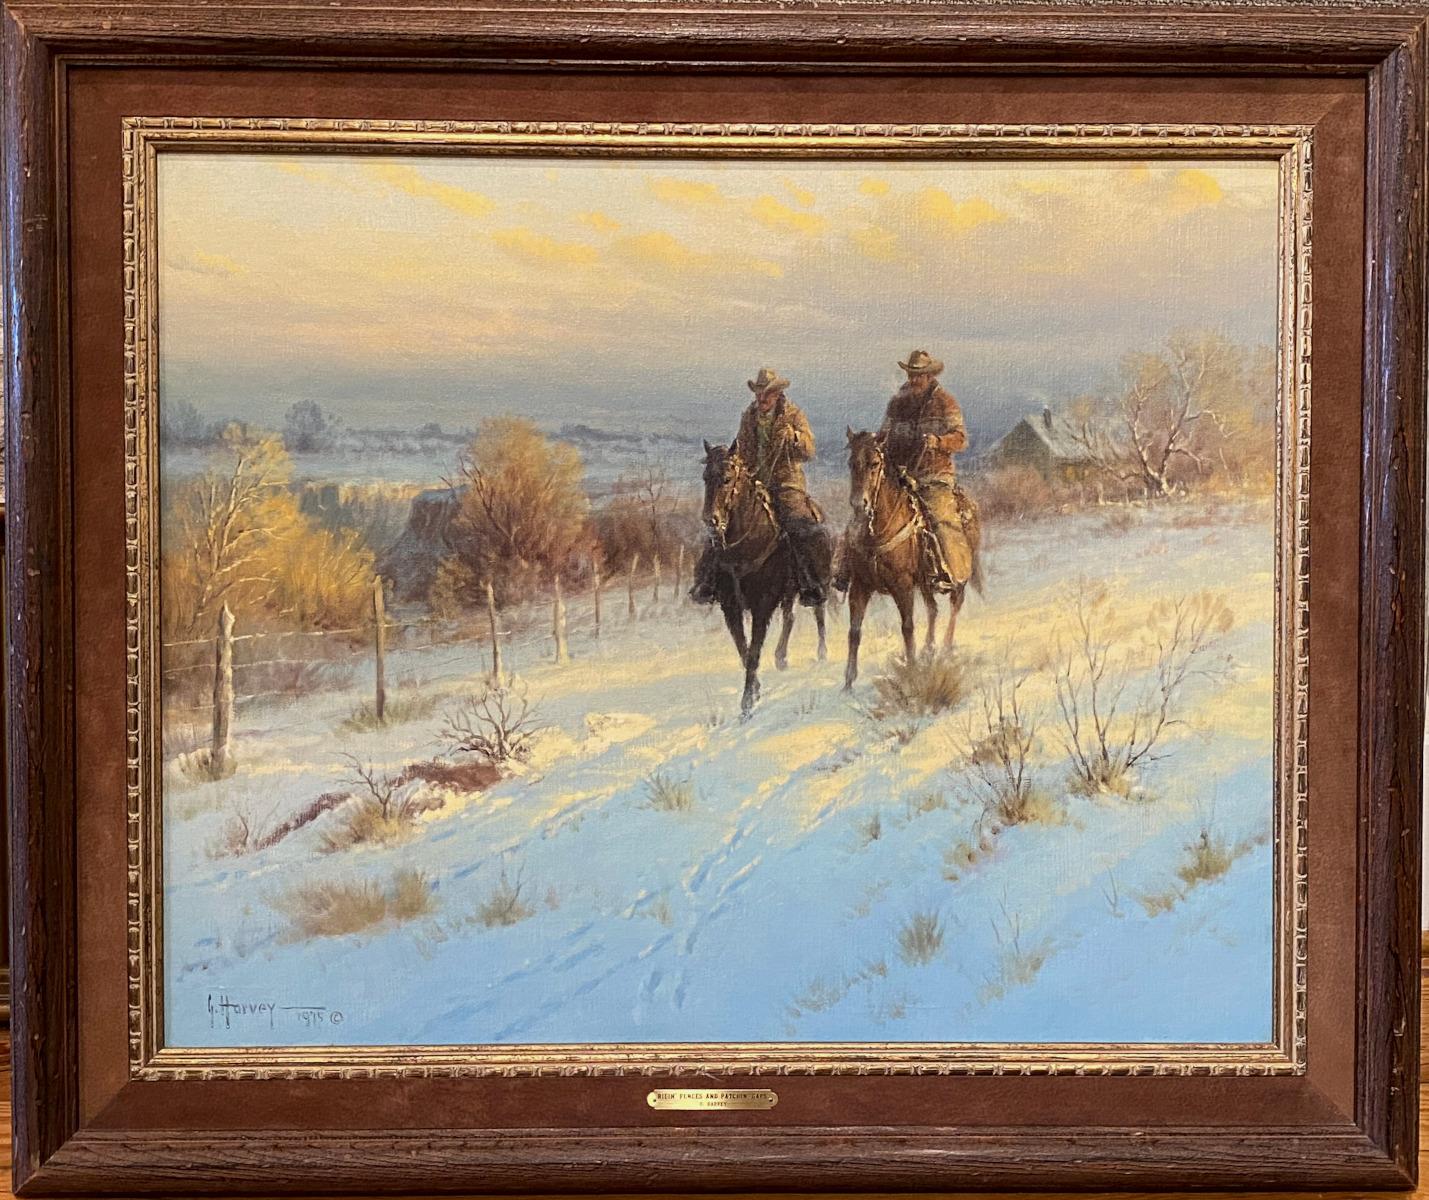 G. Harvey Animal Painting - "RIDING FENCES AND PATCHING GAPS"  WESTERN SNOW SCENE WITH COWBOYS & LIGHT